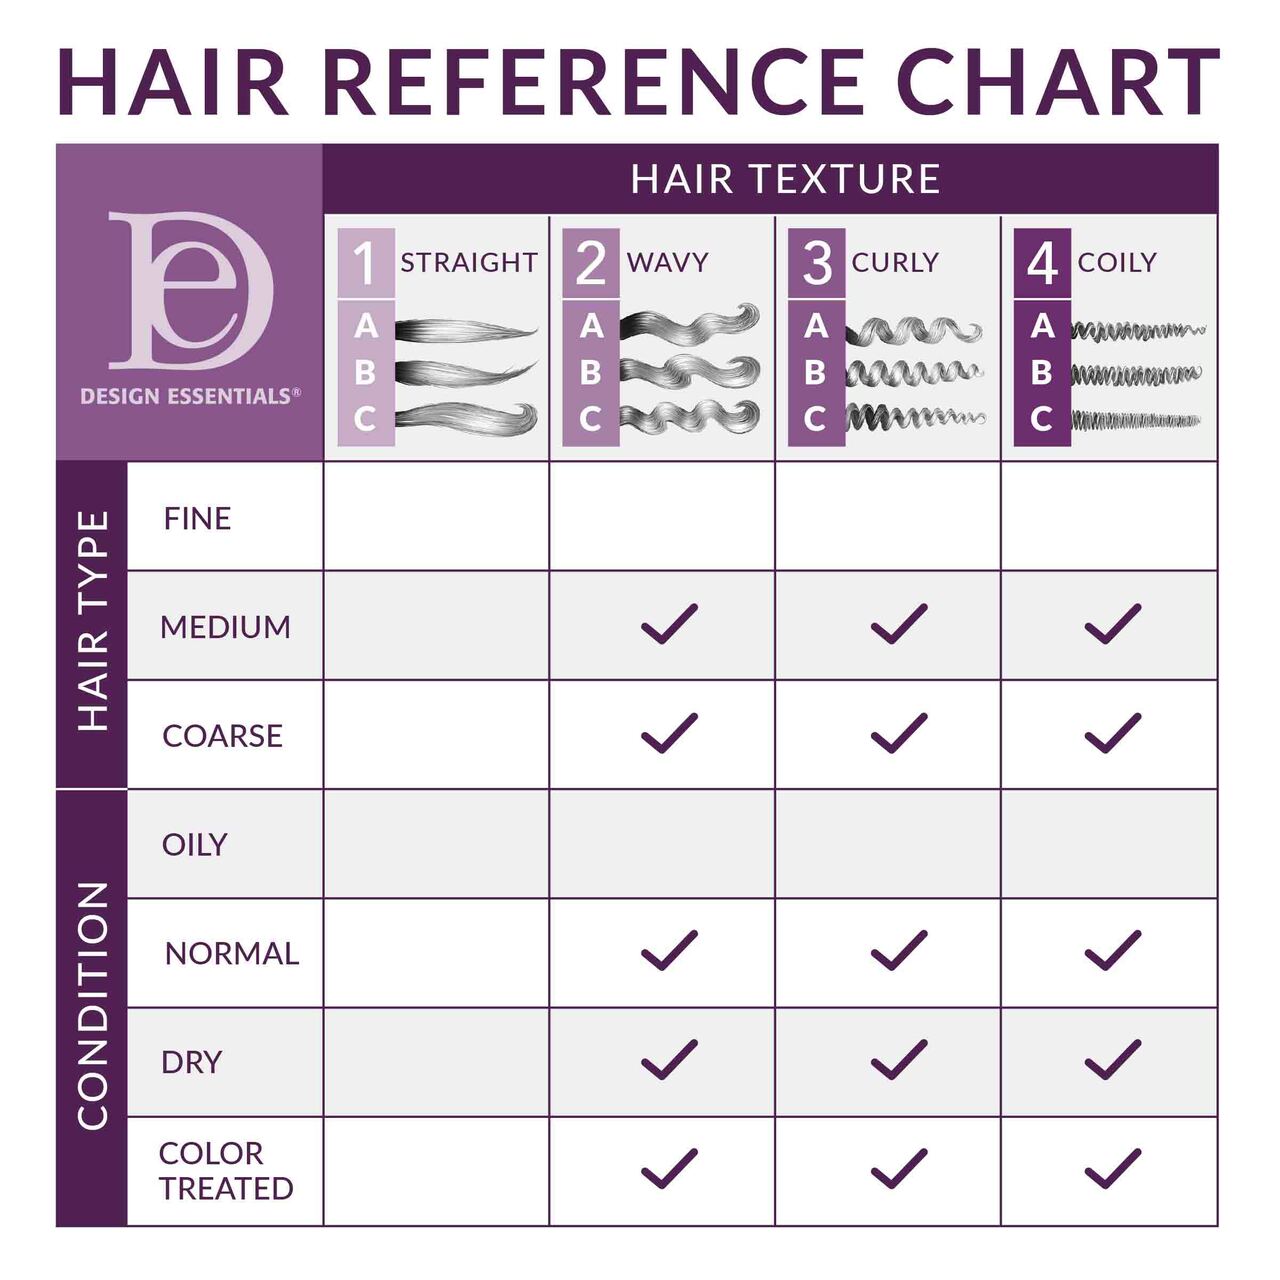 Anti-Itch_Tension_Relief_-_Hair_Reference_Chart__75014.1578657345